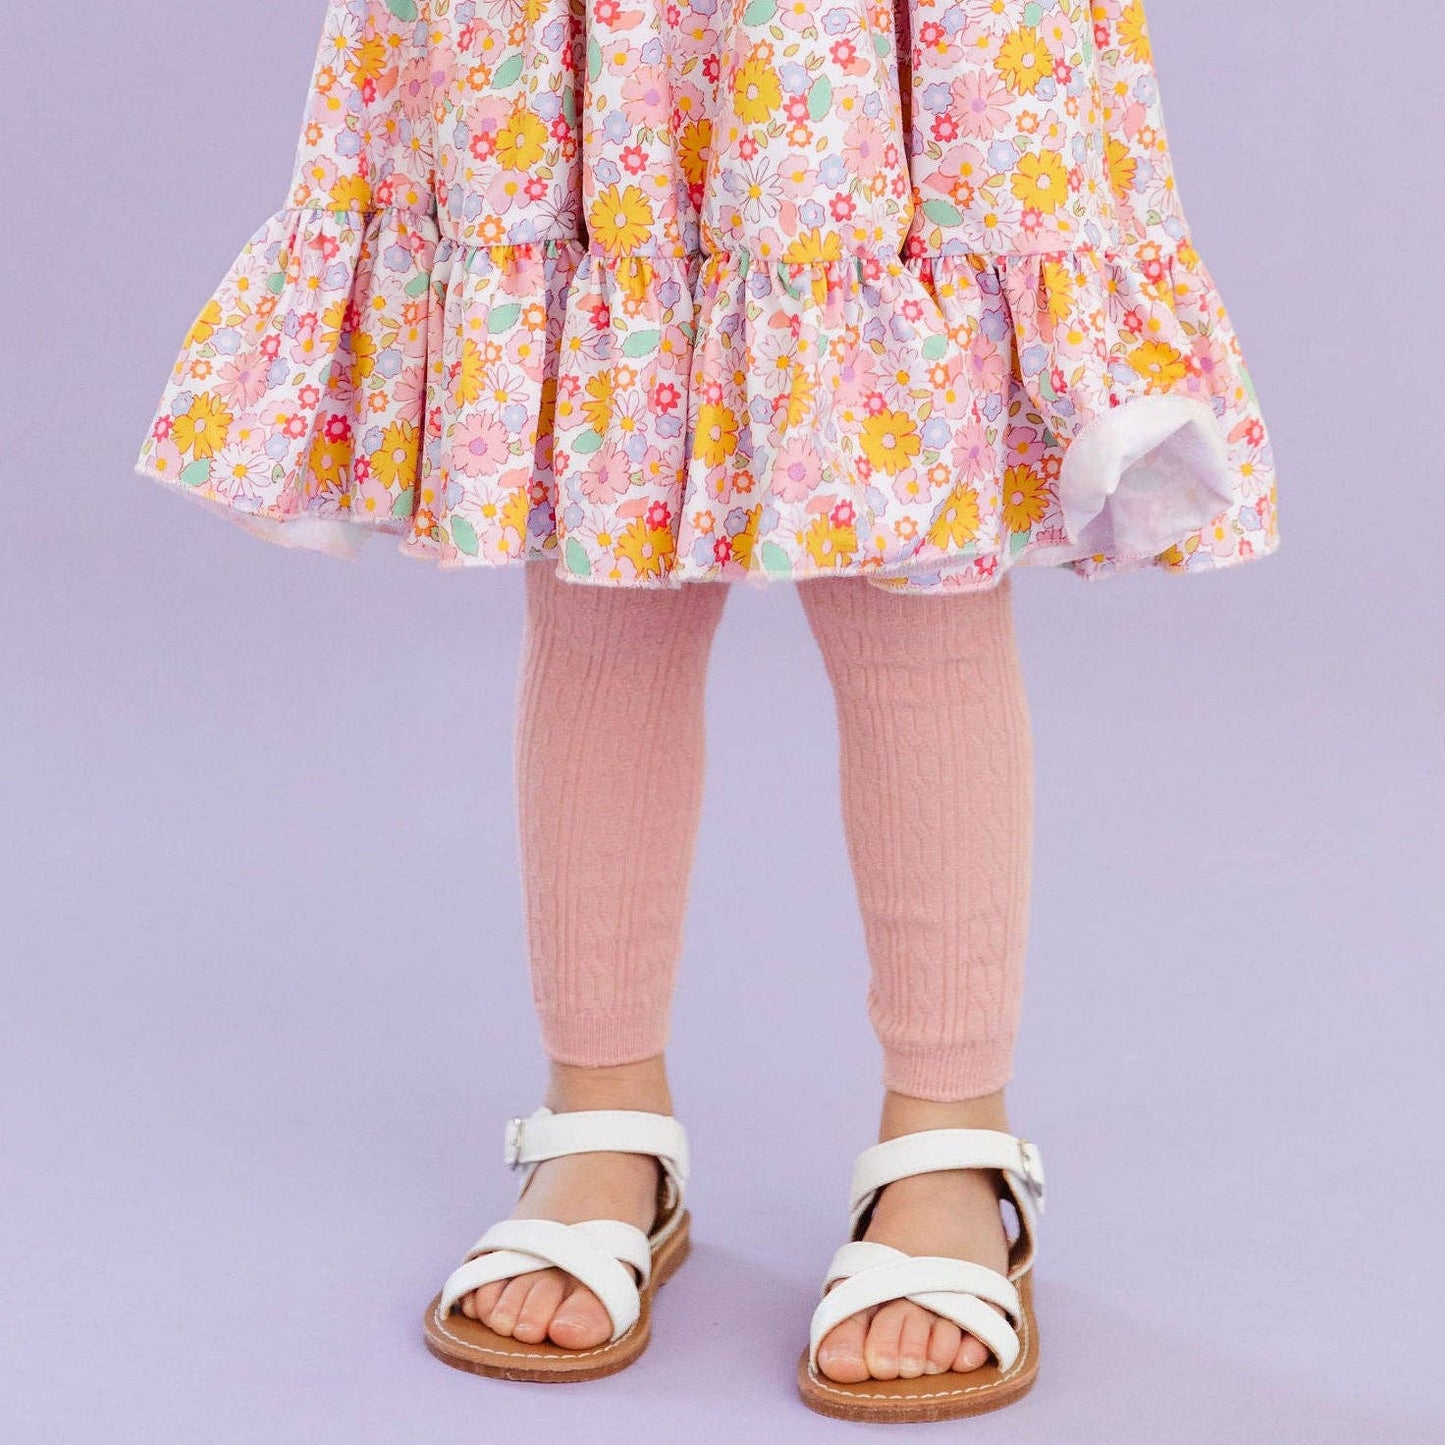 Blush Pink Cable Knit Footless Tights: 5-6 YEARS